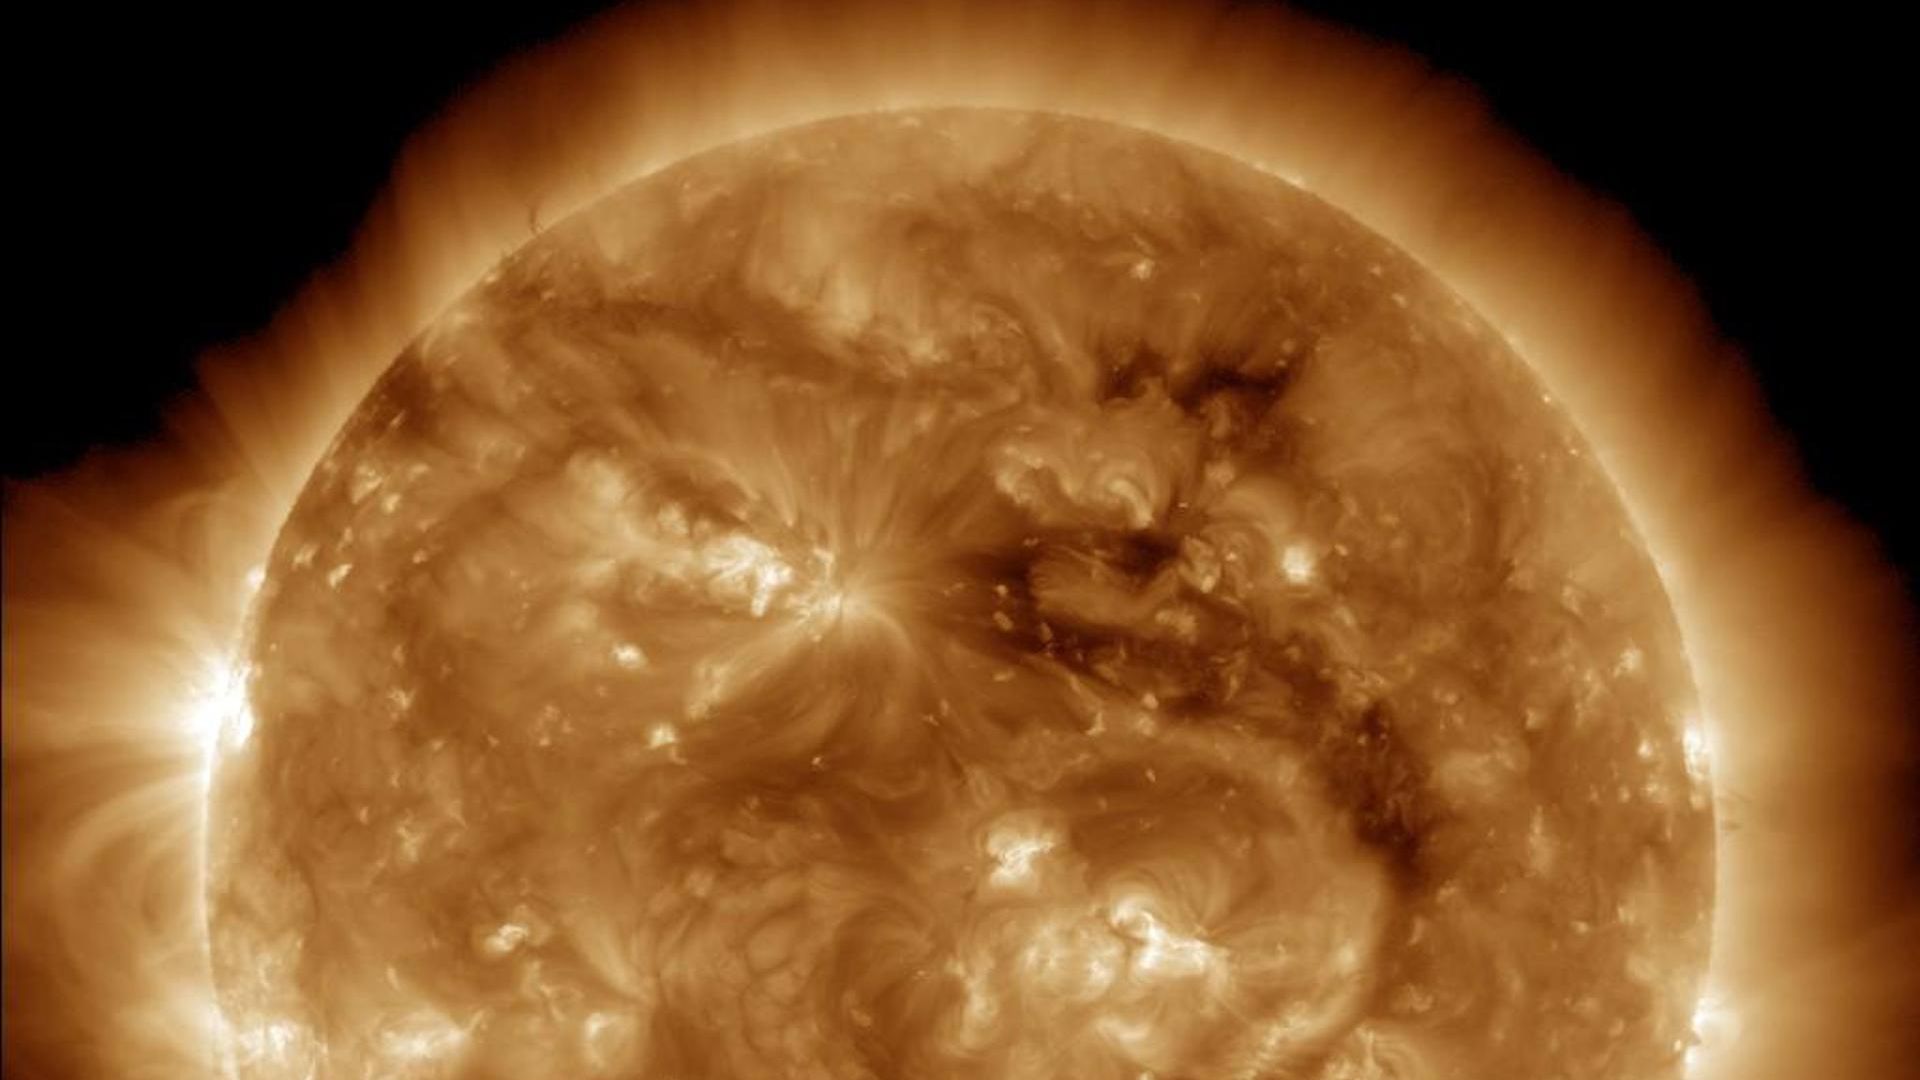 The Sun as seen by the Solar Dynamics Observatory in yellow light.